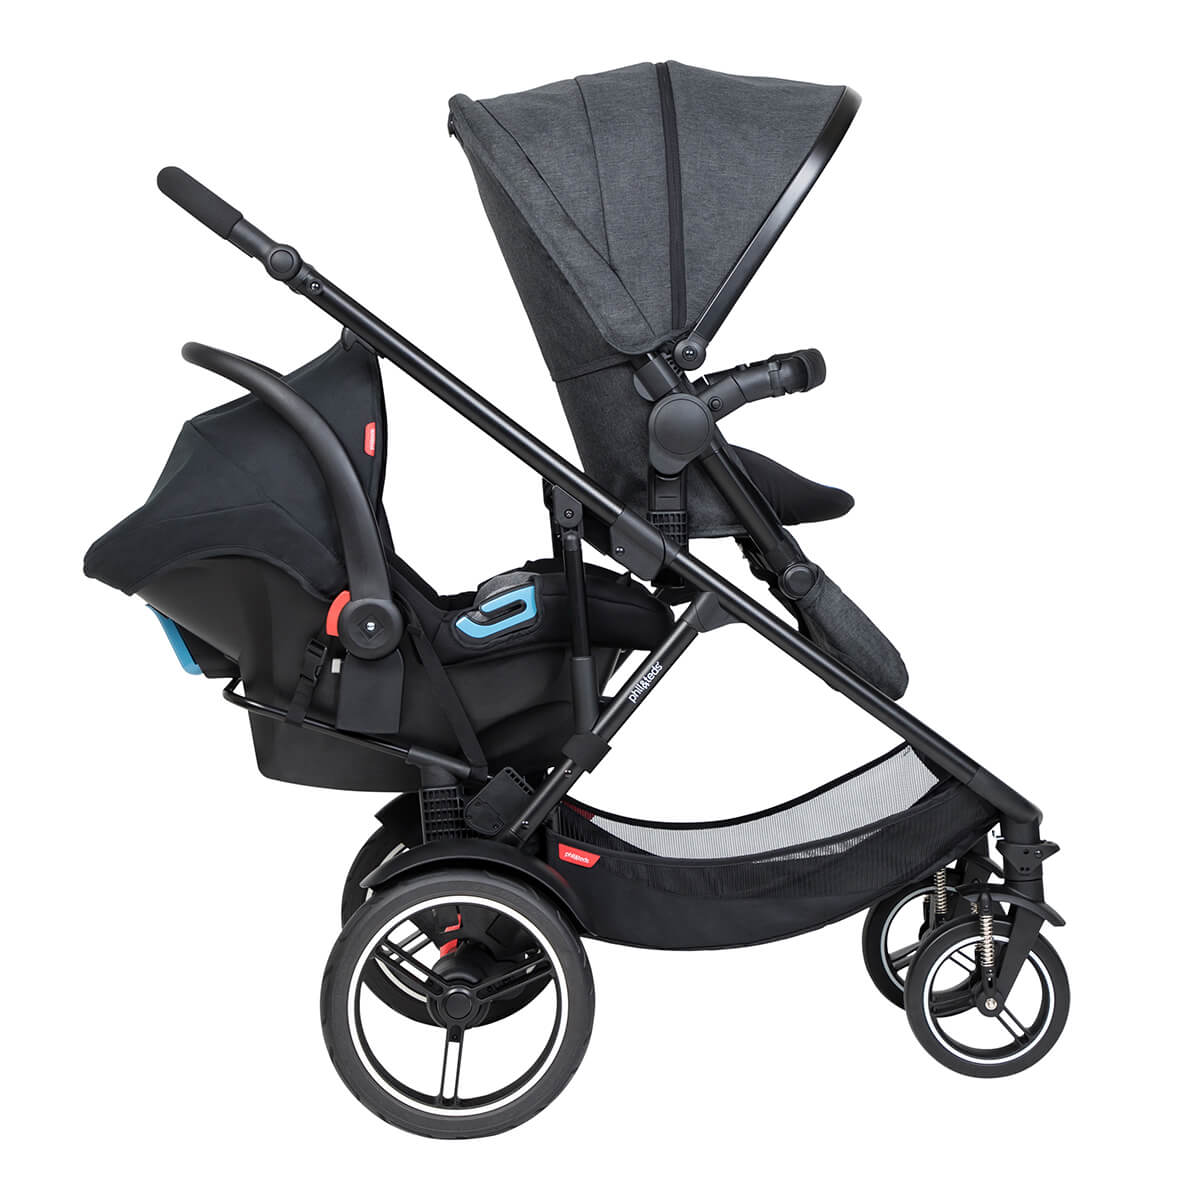 https://cdn.accentuate.io/4509528850520/19272668282968/philteds-voyager-buggy-in-forward-facing-mode-with-travel-system-in-the-rear-v1626484587967.jpg?1200x1200